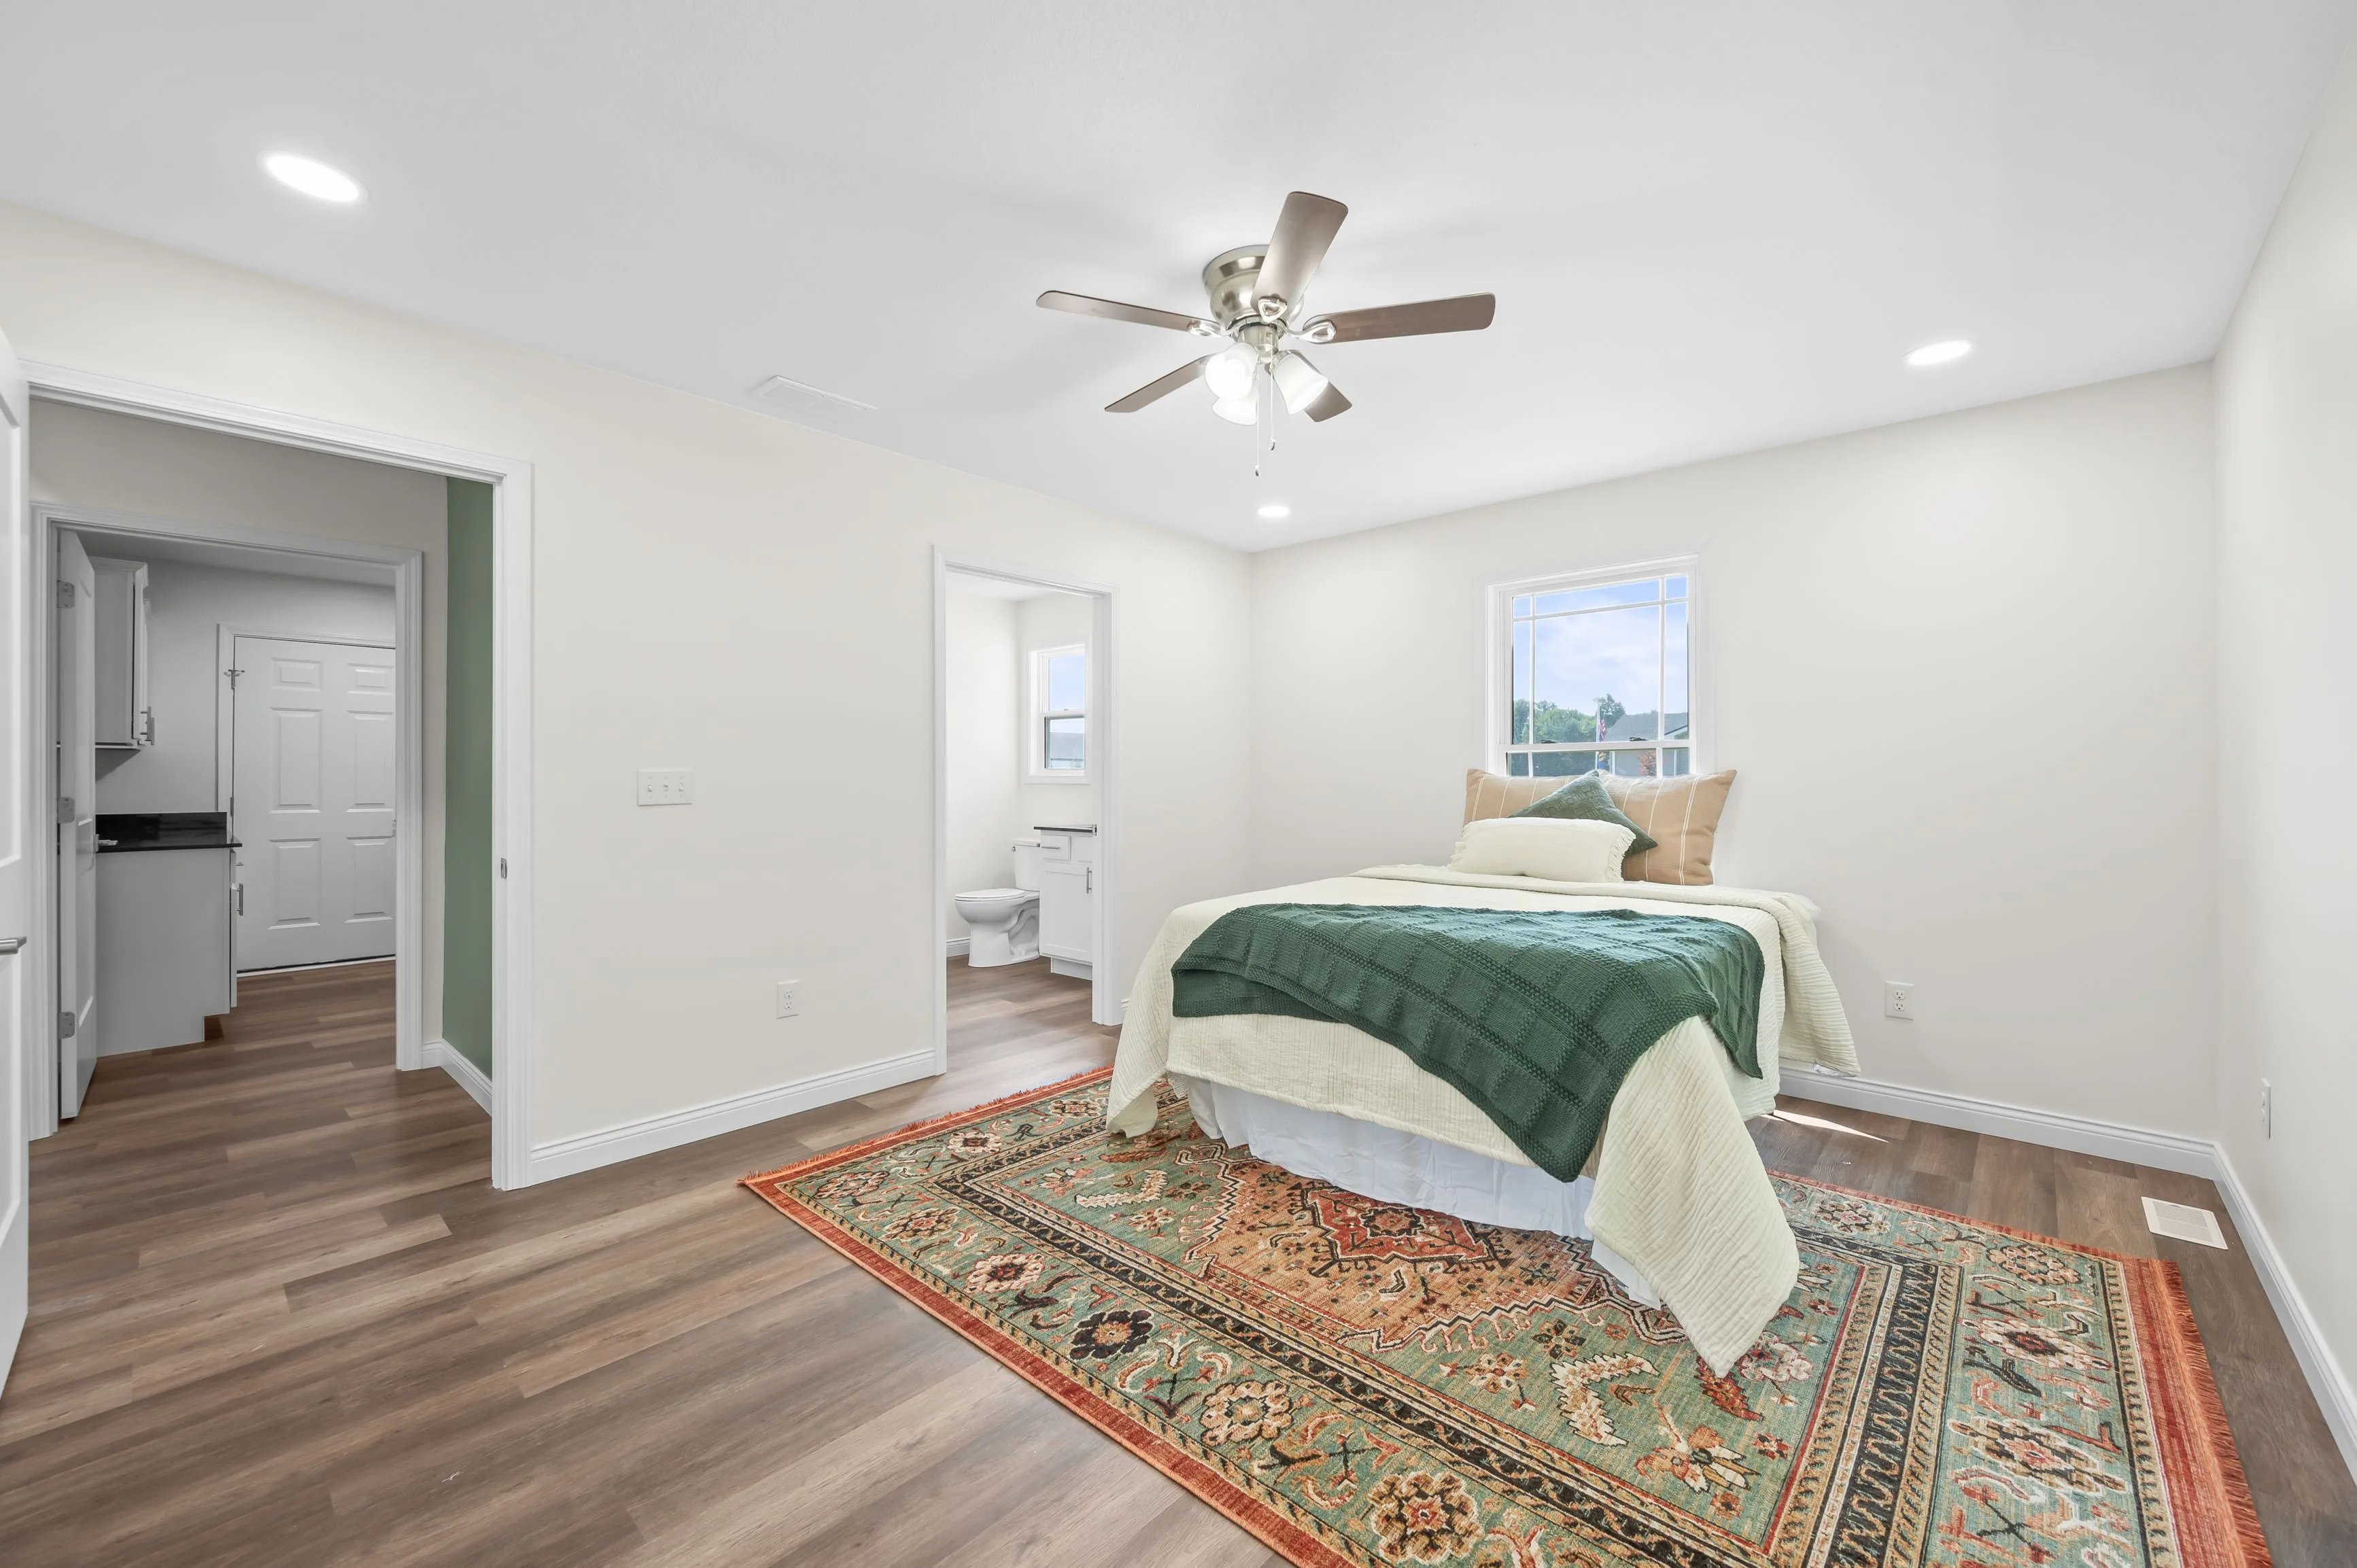 Spacious bedroom with large bed, green and white bedding, ornate area rug, ceiling fan, and ensuite restroom.